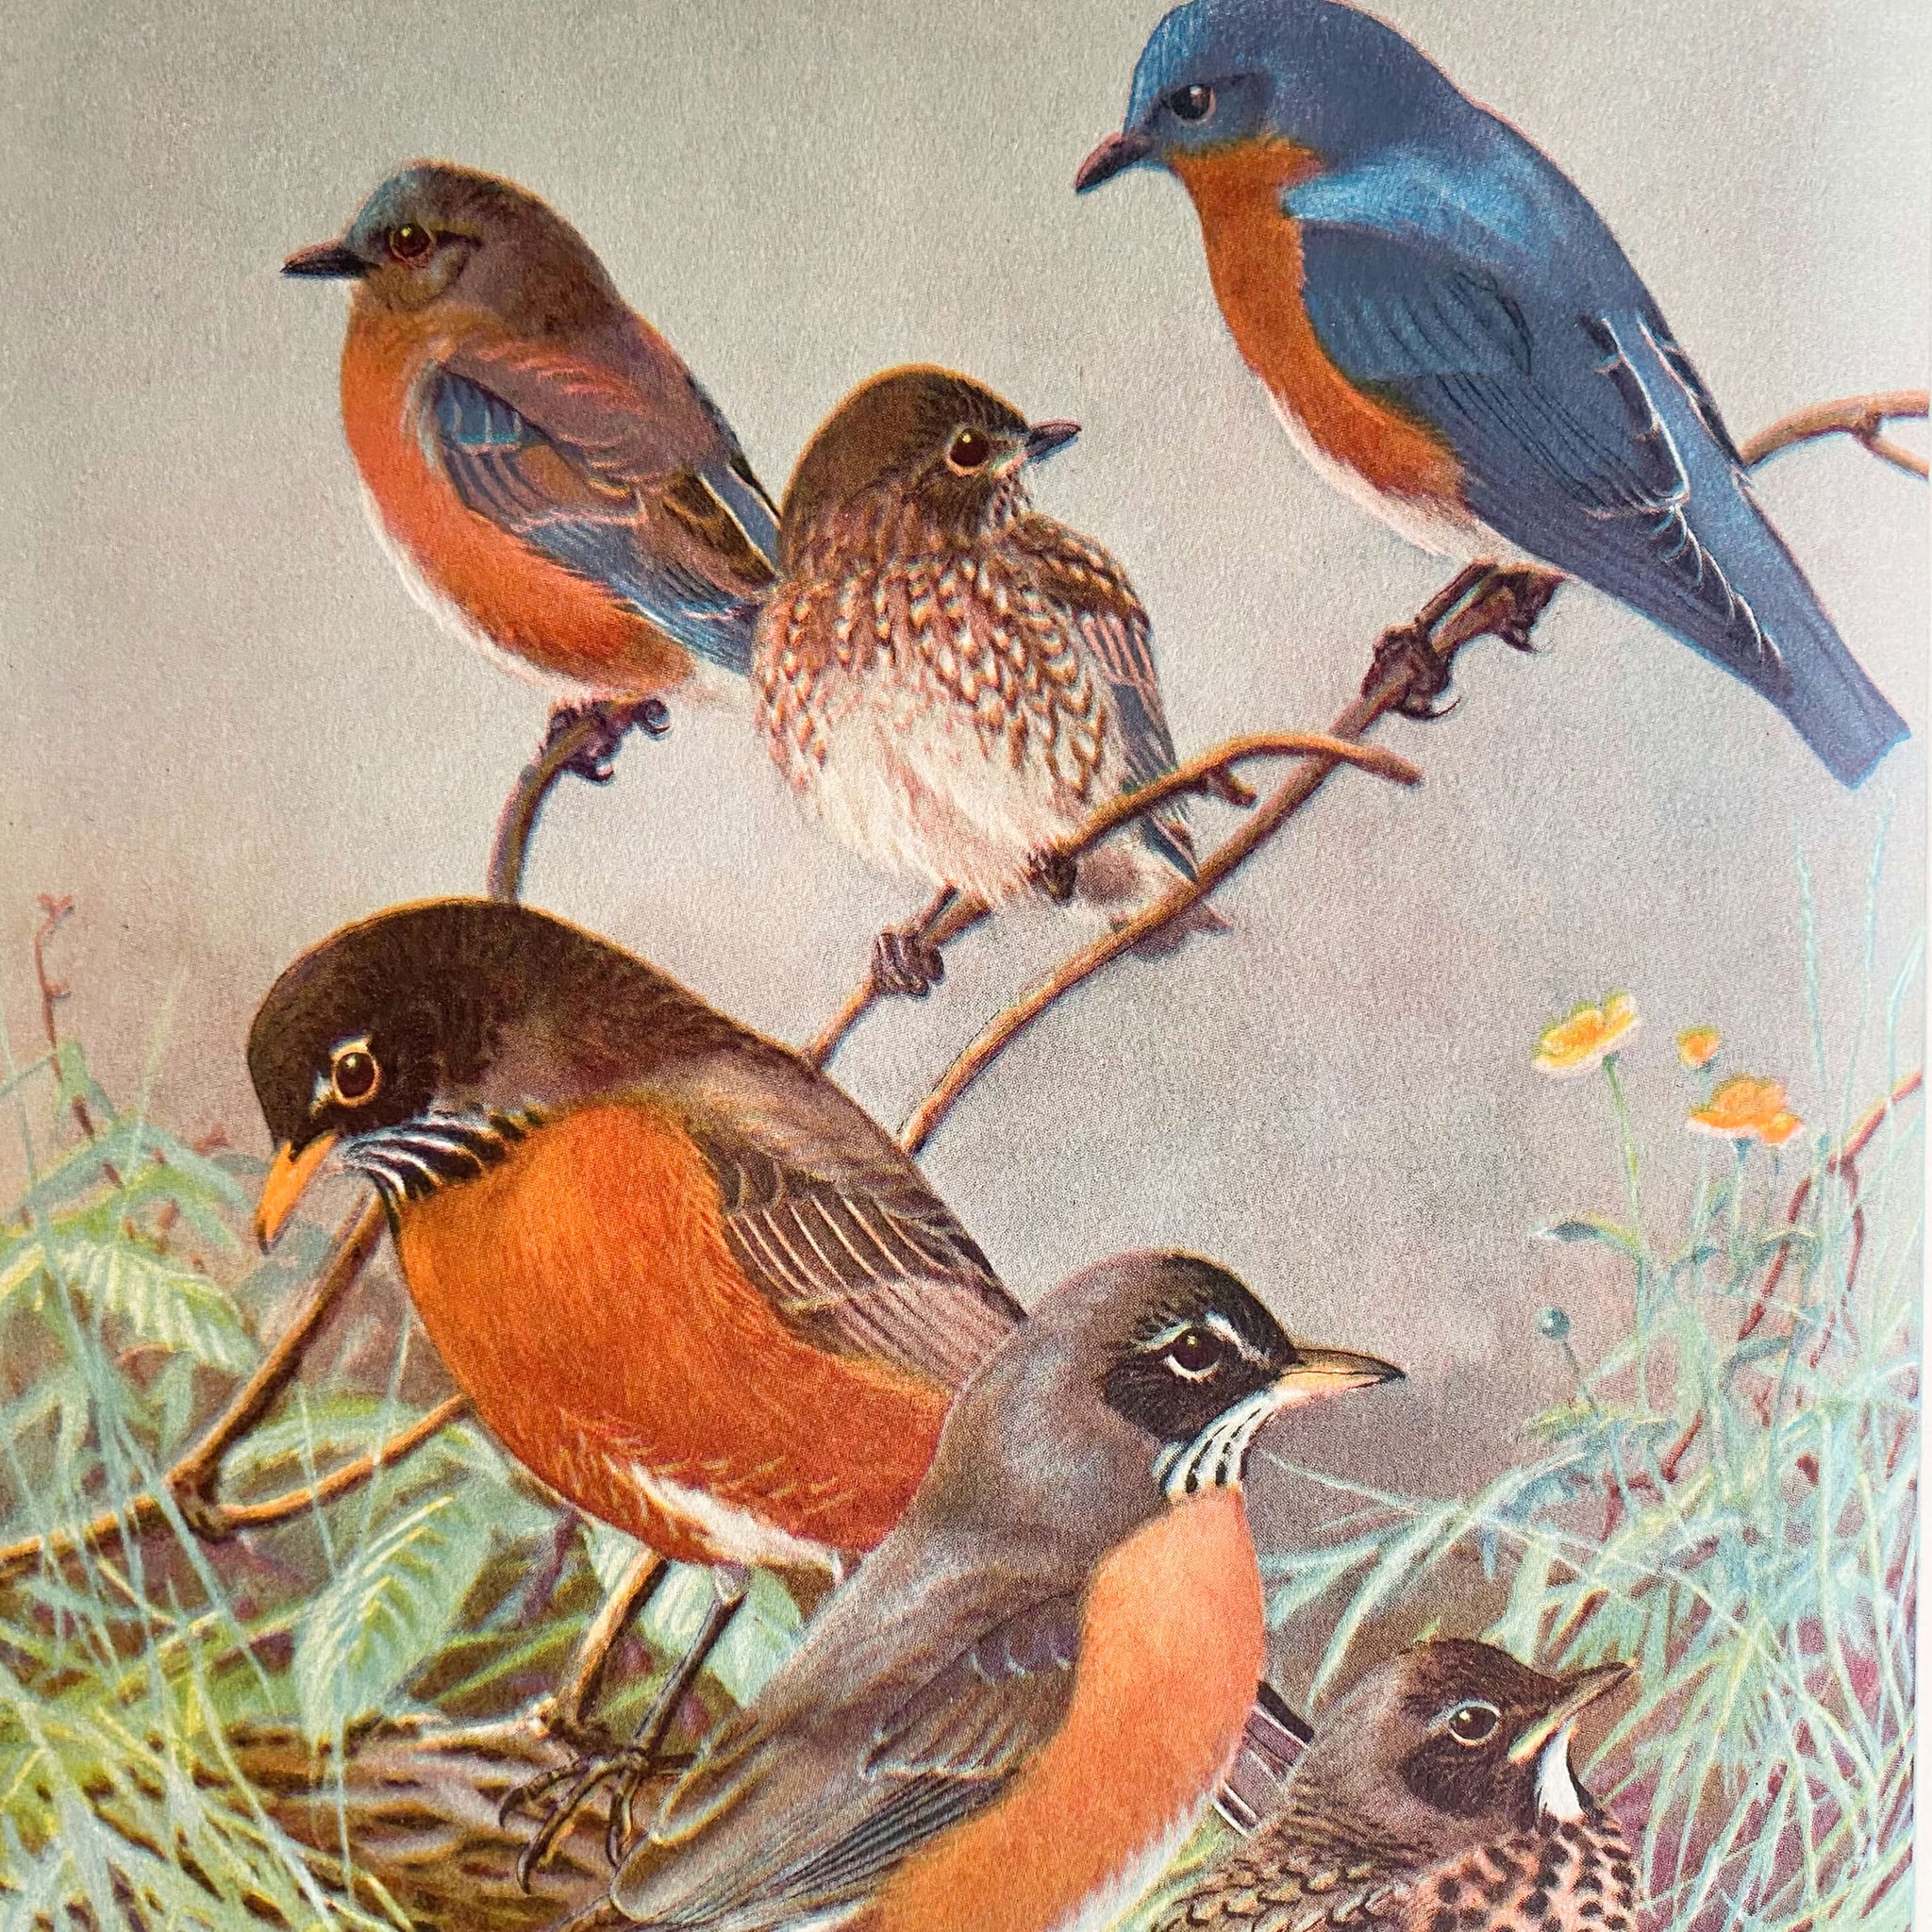 Birds in the Garden and How To Attract Them by Margaret McKenny - 1939 Edition